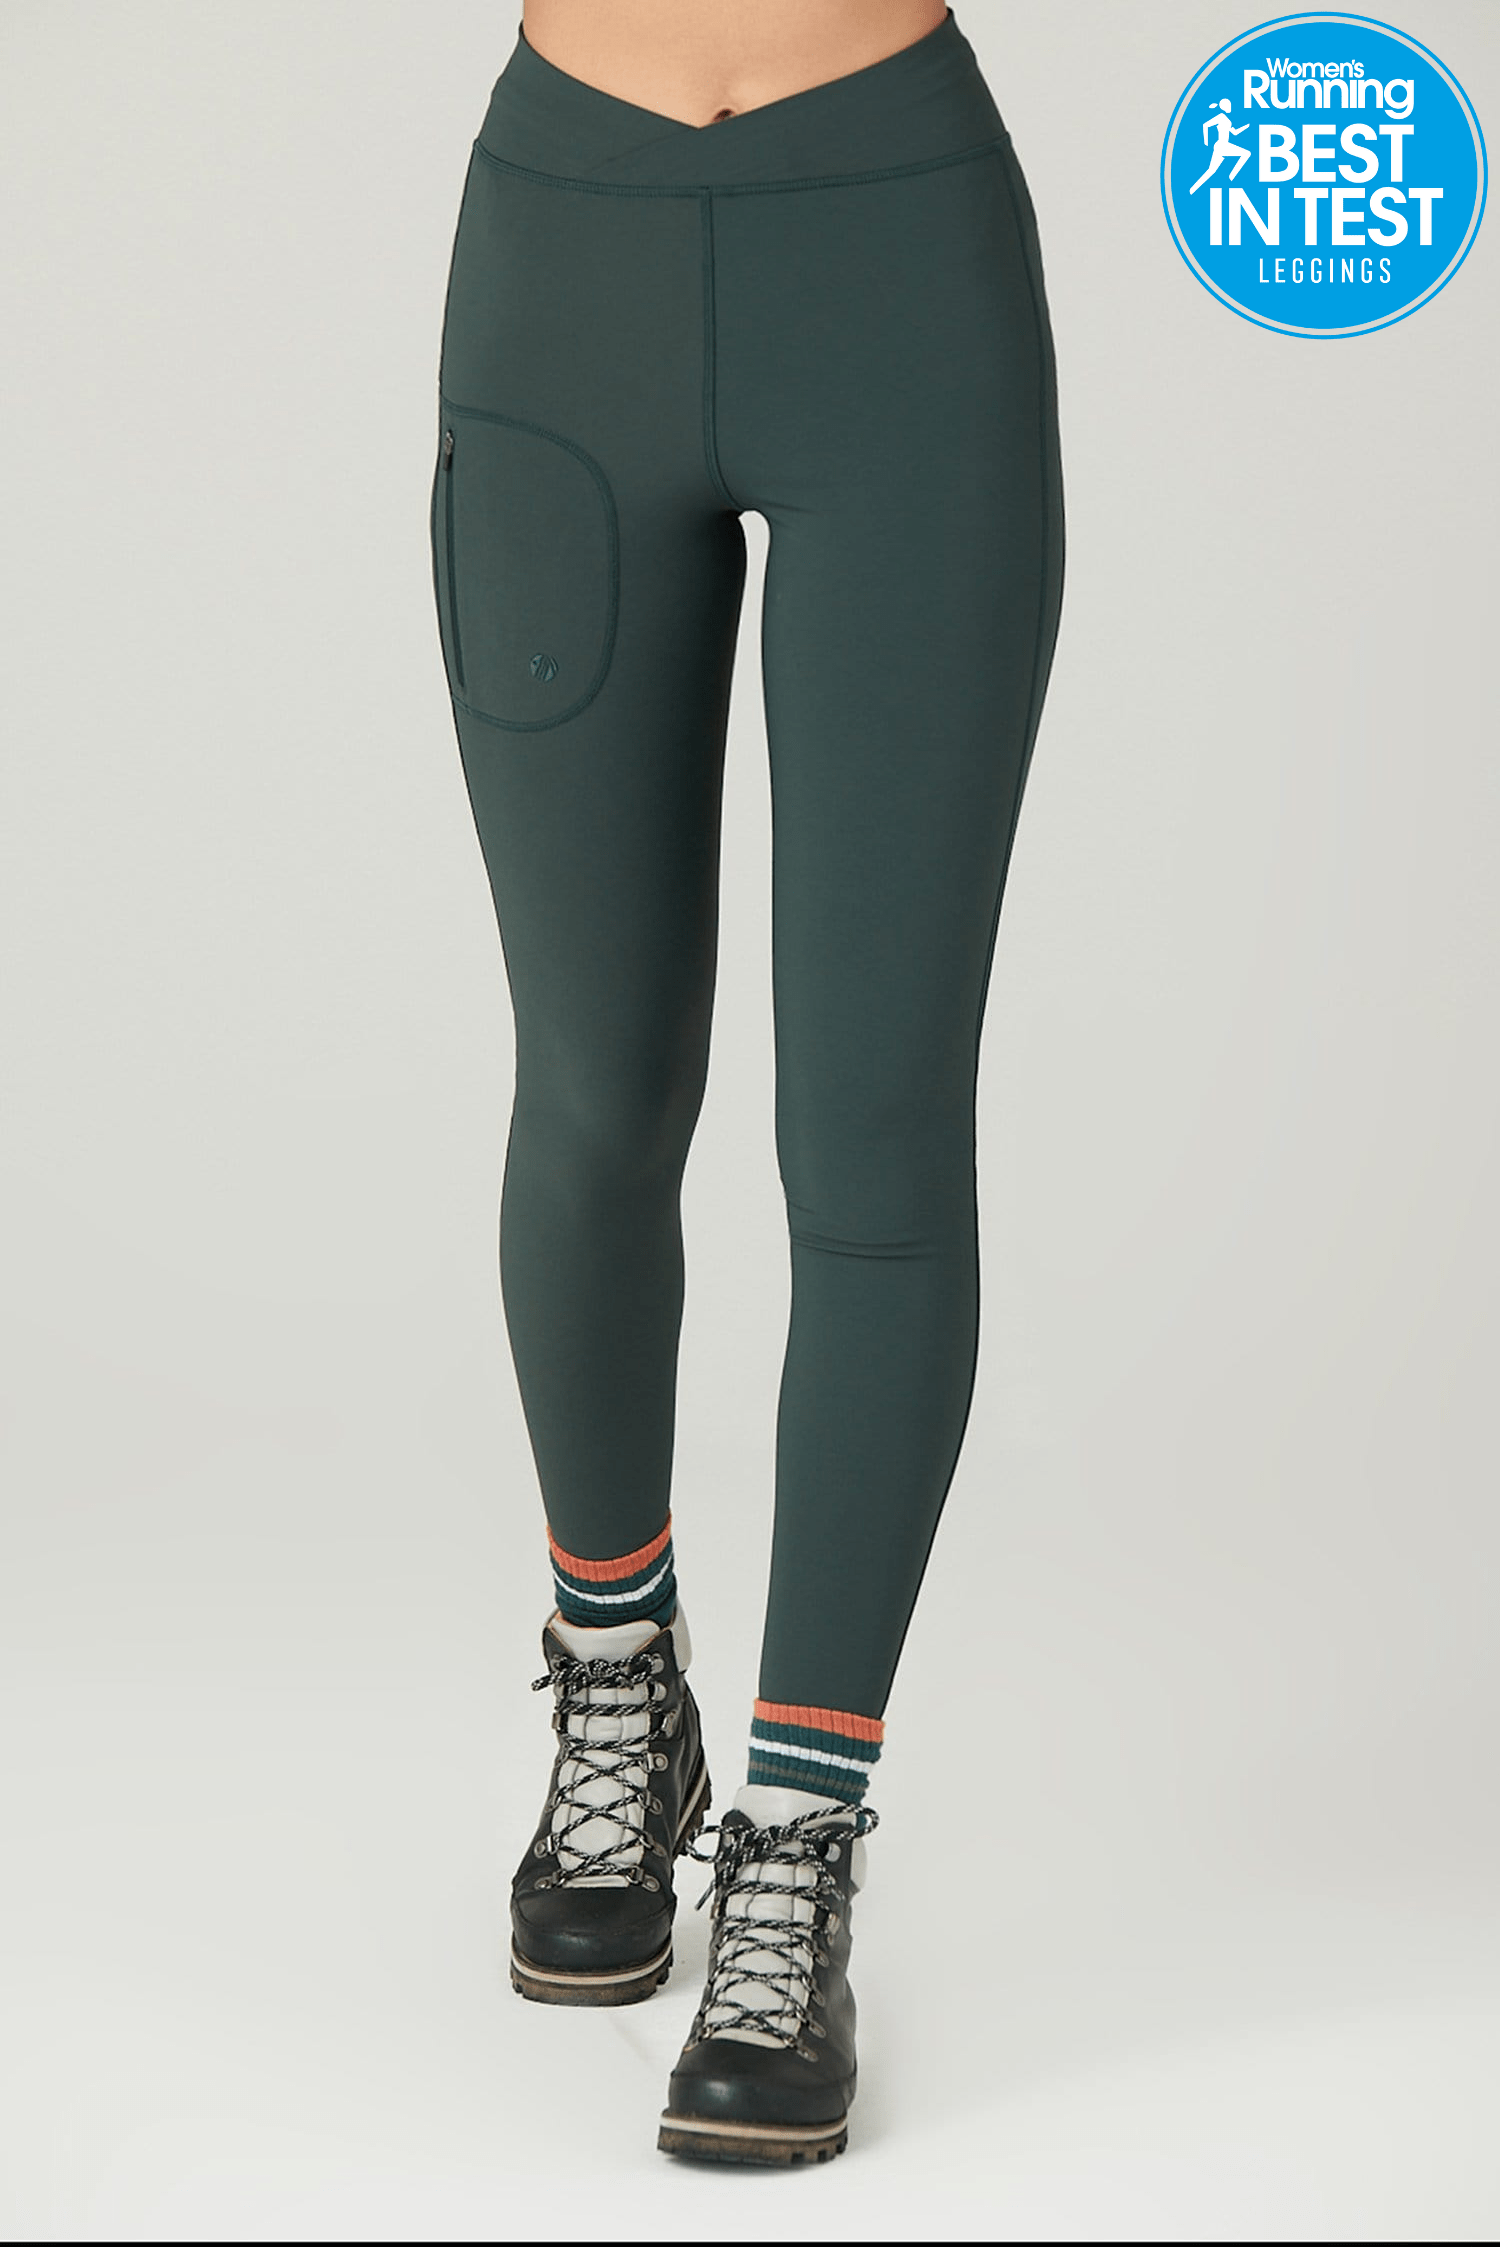 Outdoor Softshell Leggings - Forest Green - Xsmall - Womens - Acai Outdoorwear